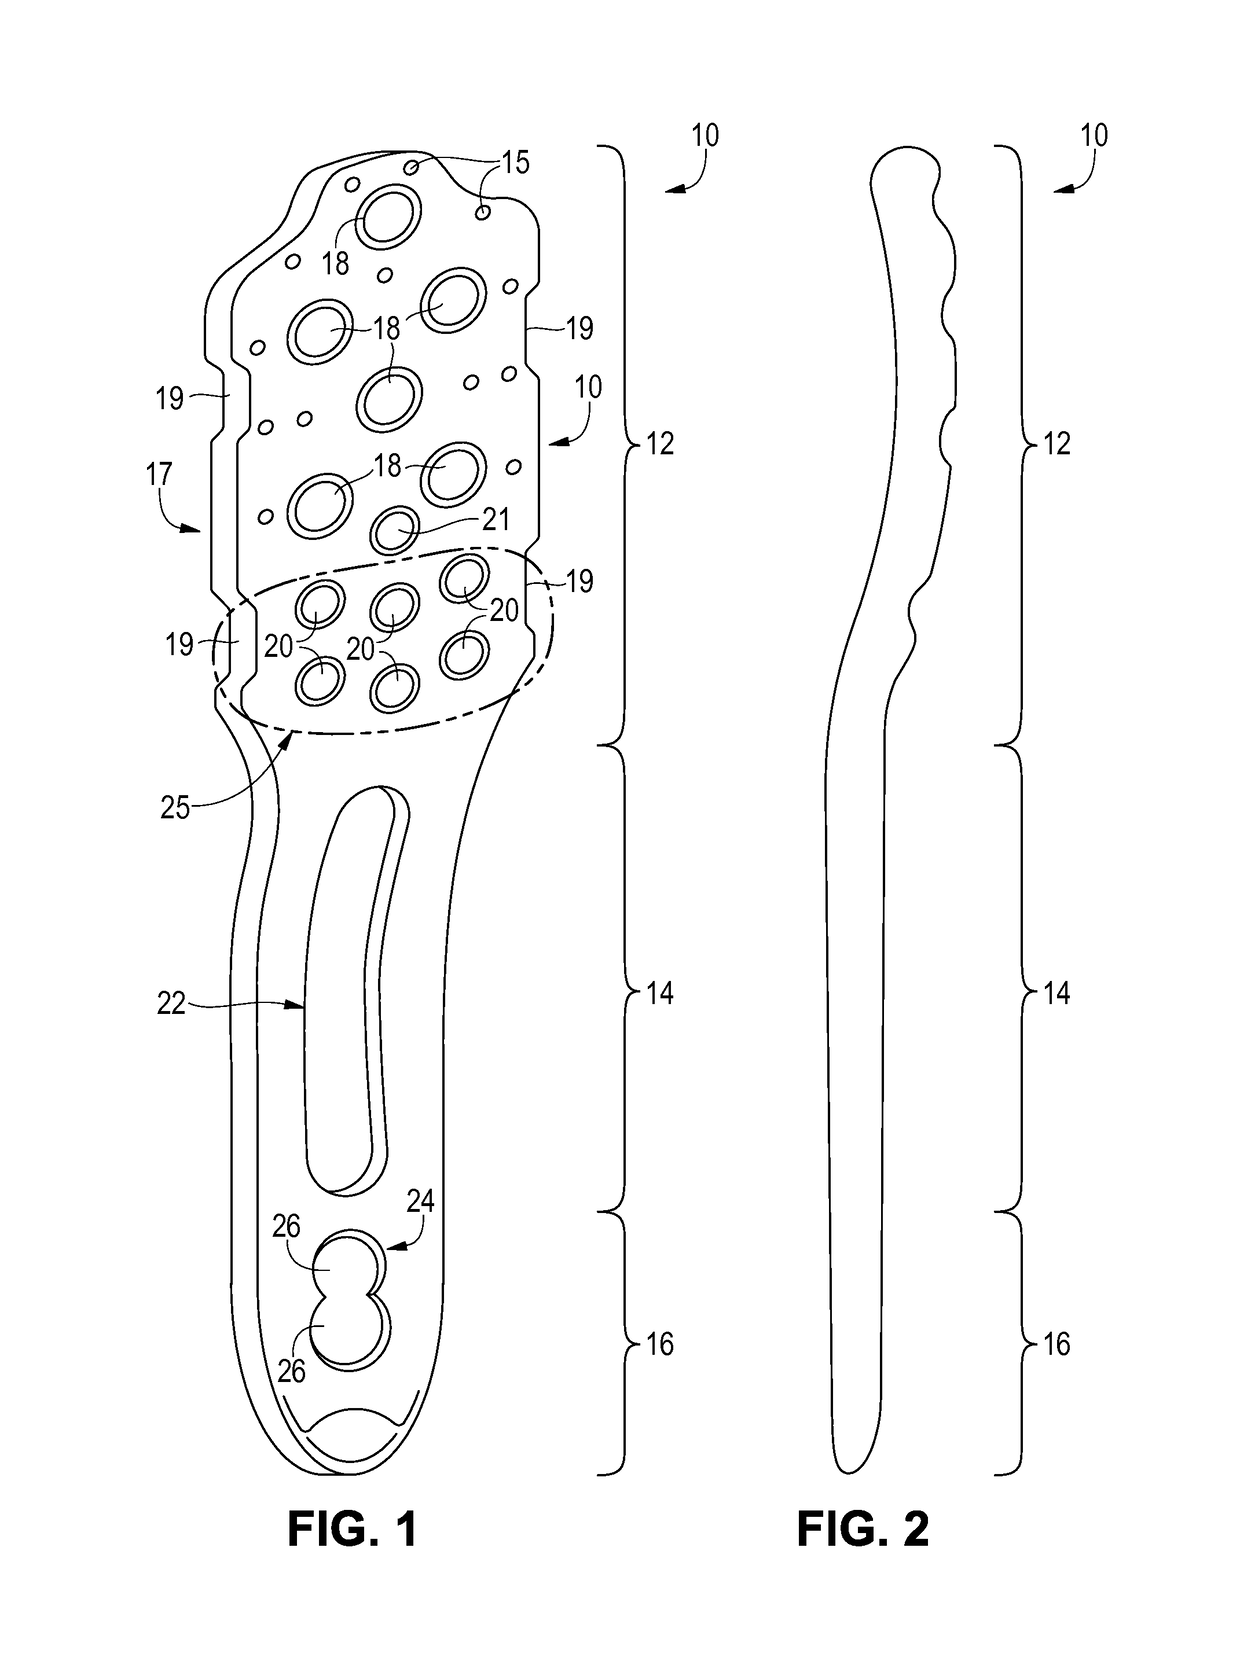 Fixation device for proximal humerus fractures